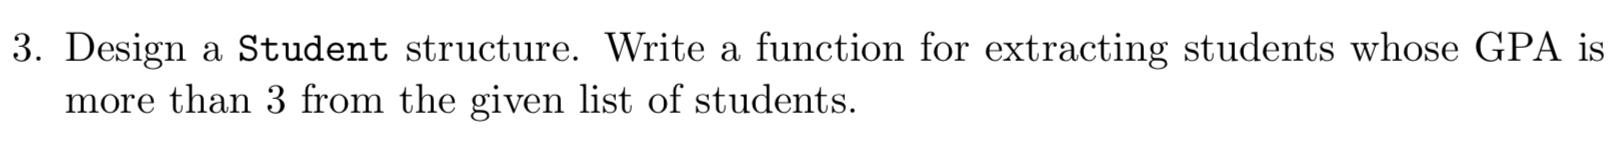 3. Design a Student structure. Write a function for extracting students whose GPA is more than 3 from the